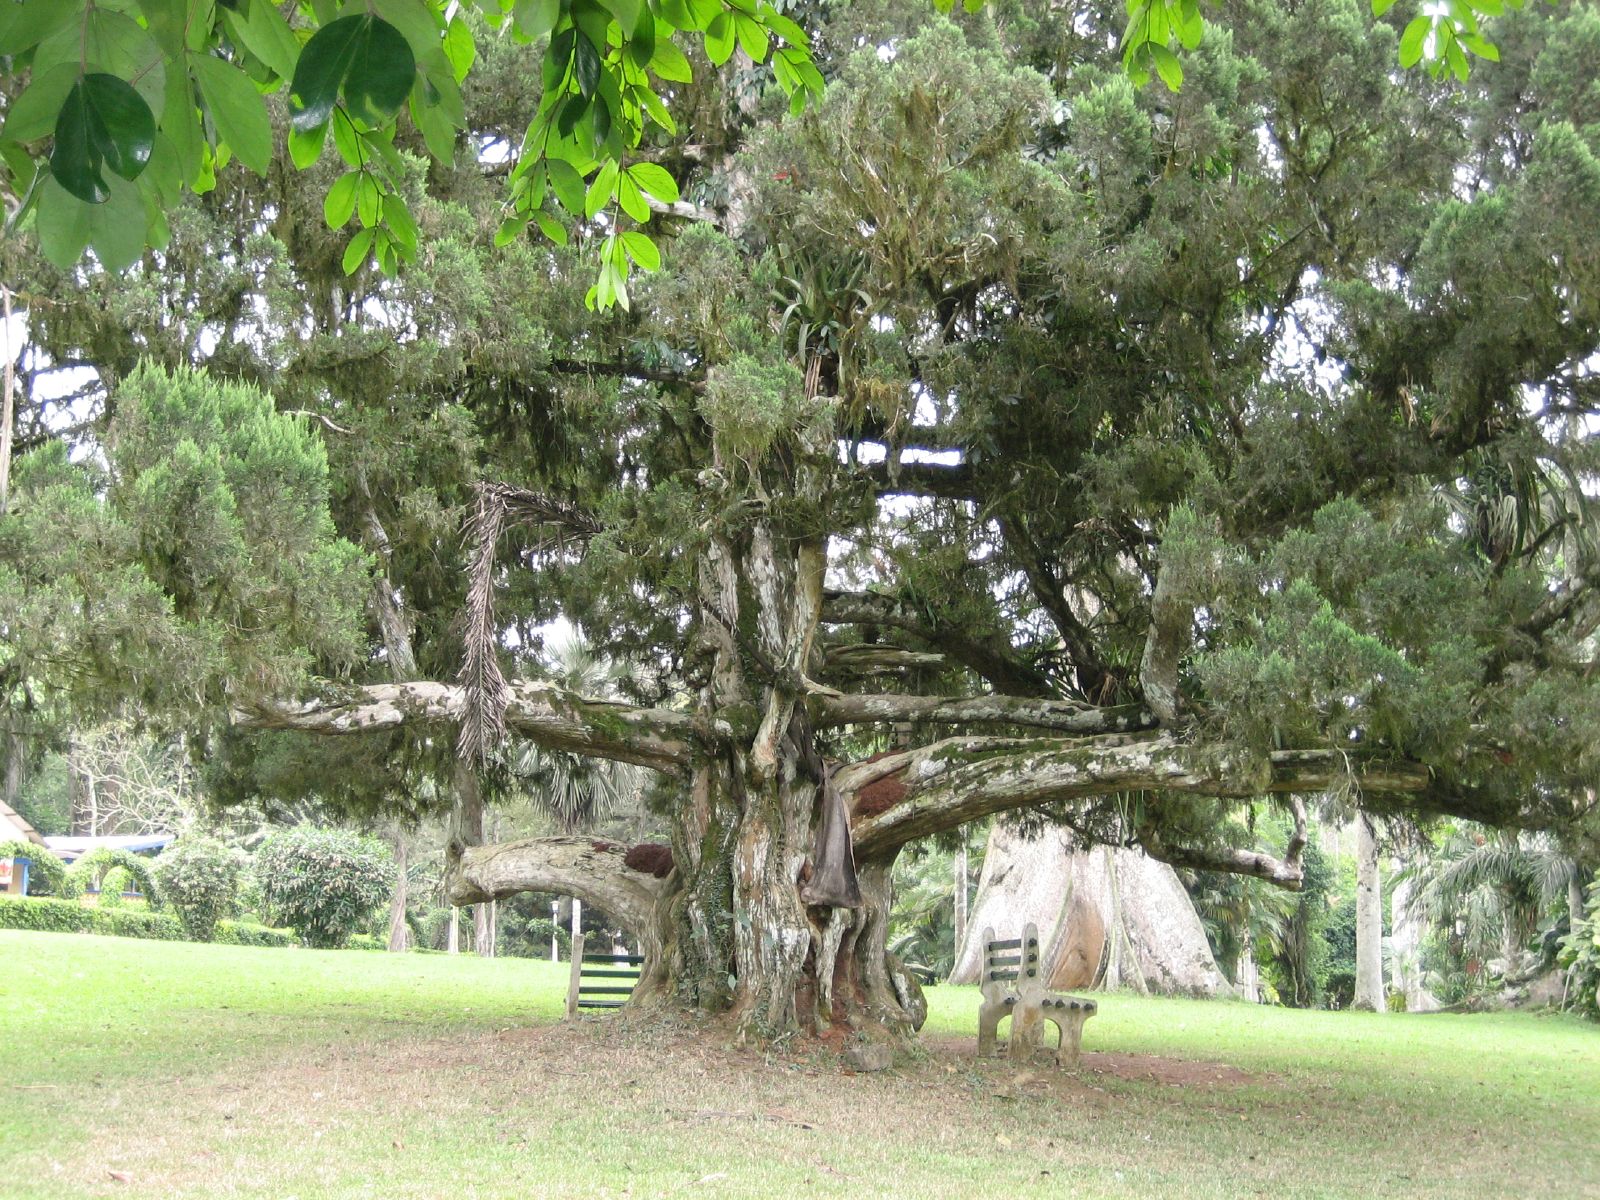 an old oak tree with benches underneath it